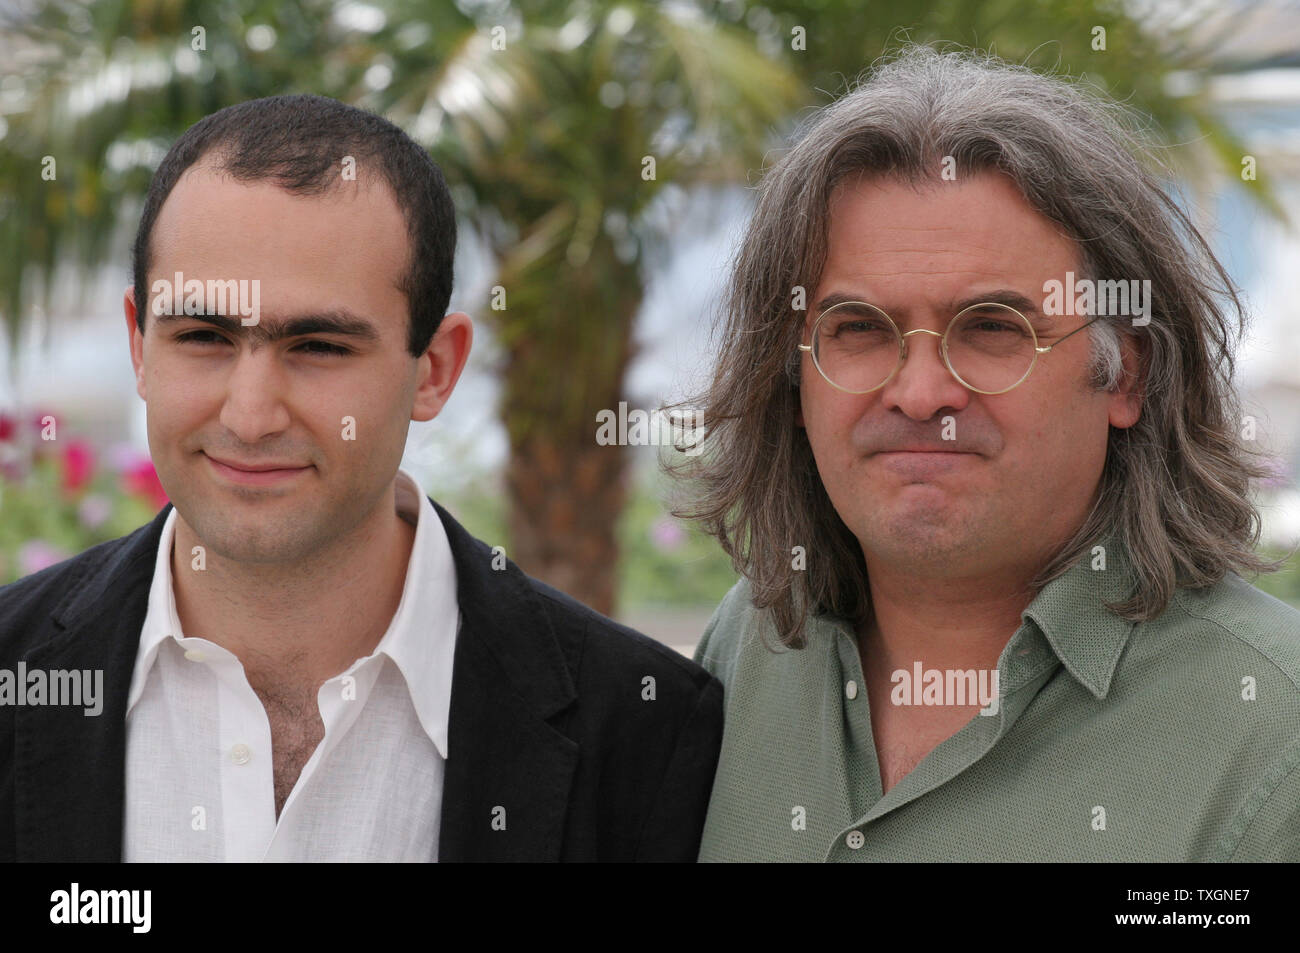 Actor Khalid Abdalla (L) and director Paul Greengrass arrive at a photo call for their film 'United 93' at the 59th Annual Cannes Film Festival in Cannes, France on May 26, 2006.           (UPI Photo/David Silpa) Stock Photo